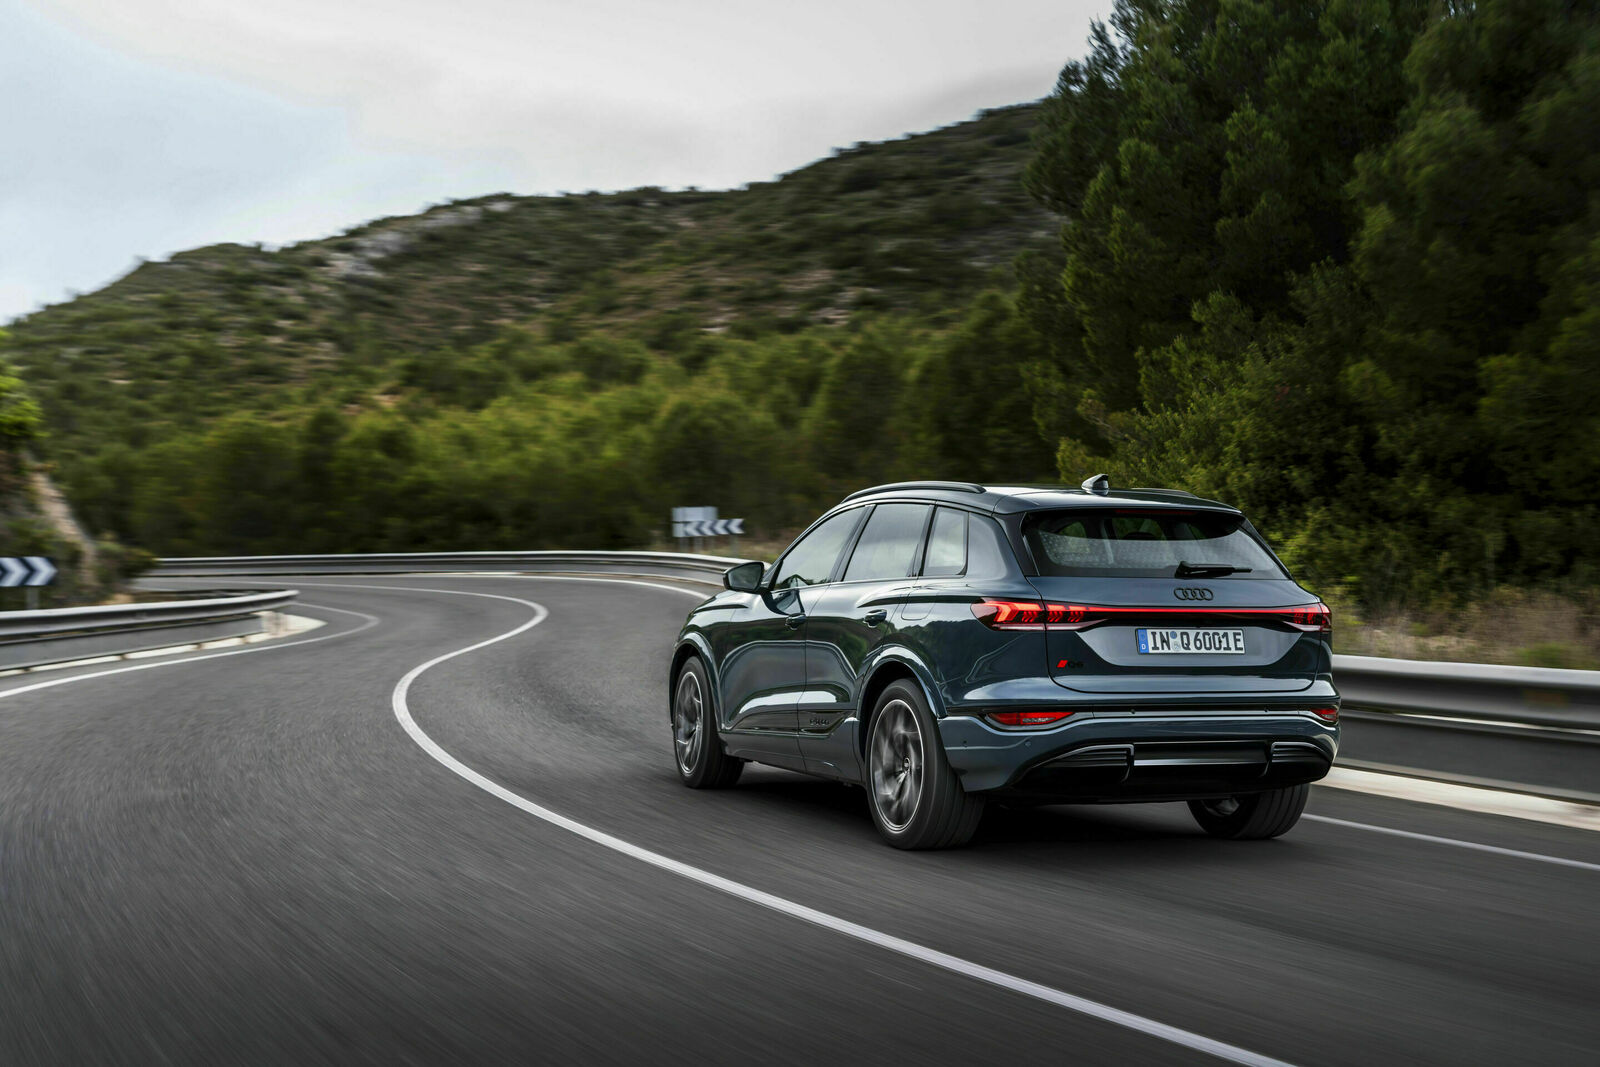 An image of a dark gray Audi Q6 e-tron speeding on a curvy mountain road. The environment is green with trees and shrubs along the road.